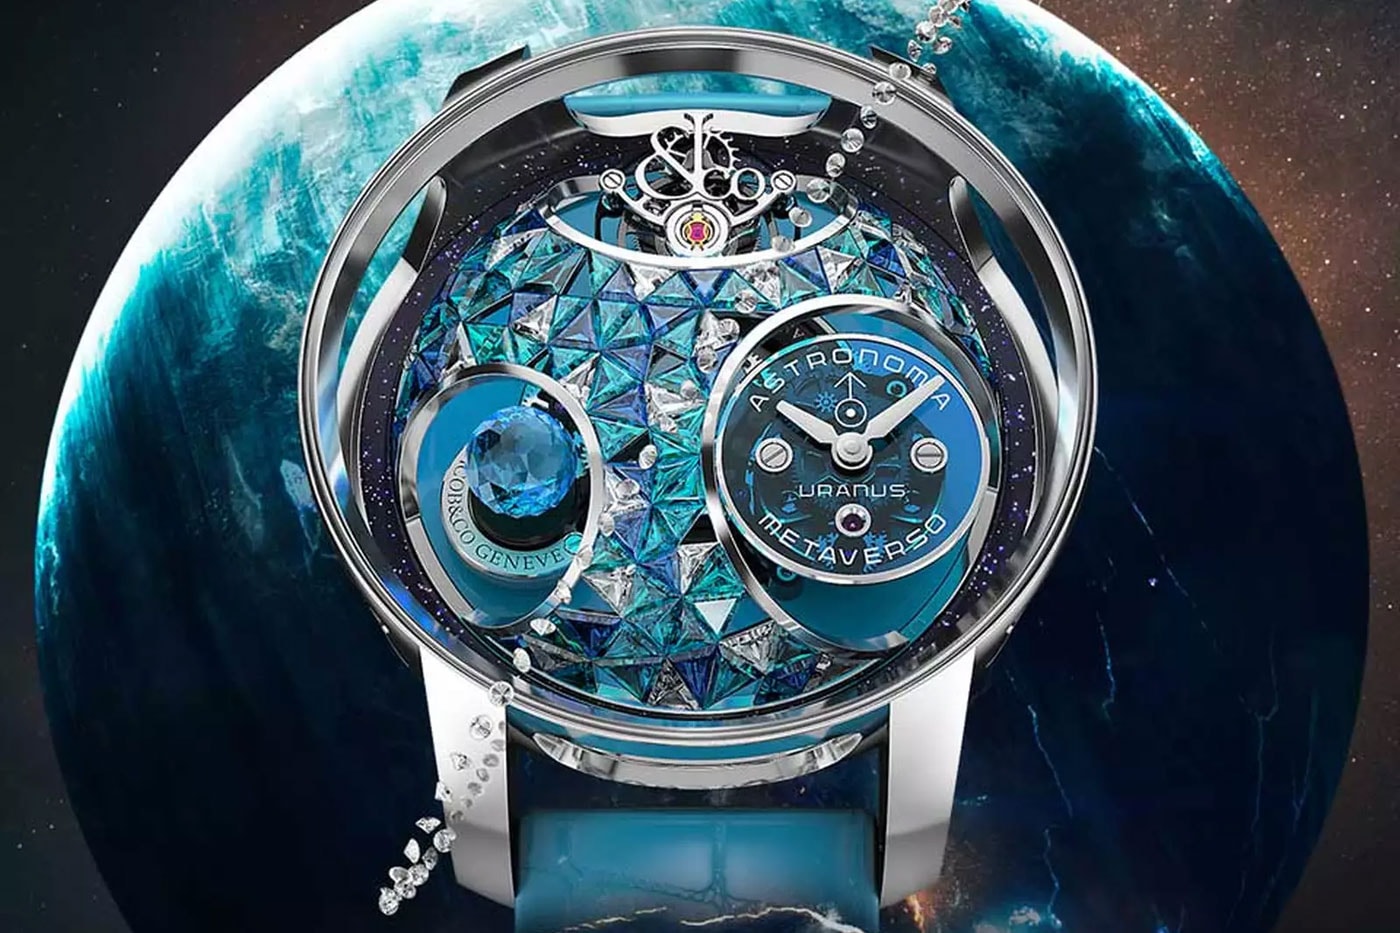 Jacob & Co. Launches NFTs Astronomia MetaversoCollection